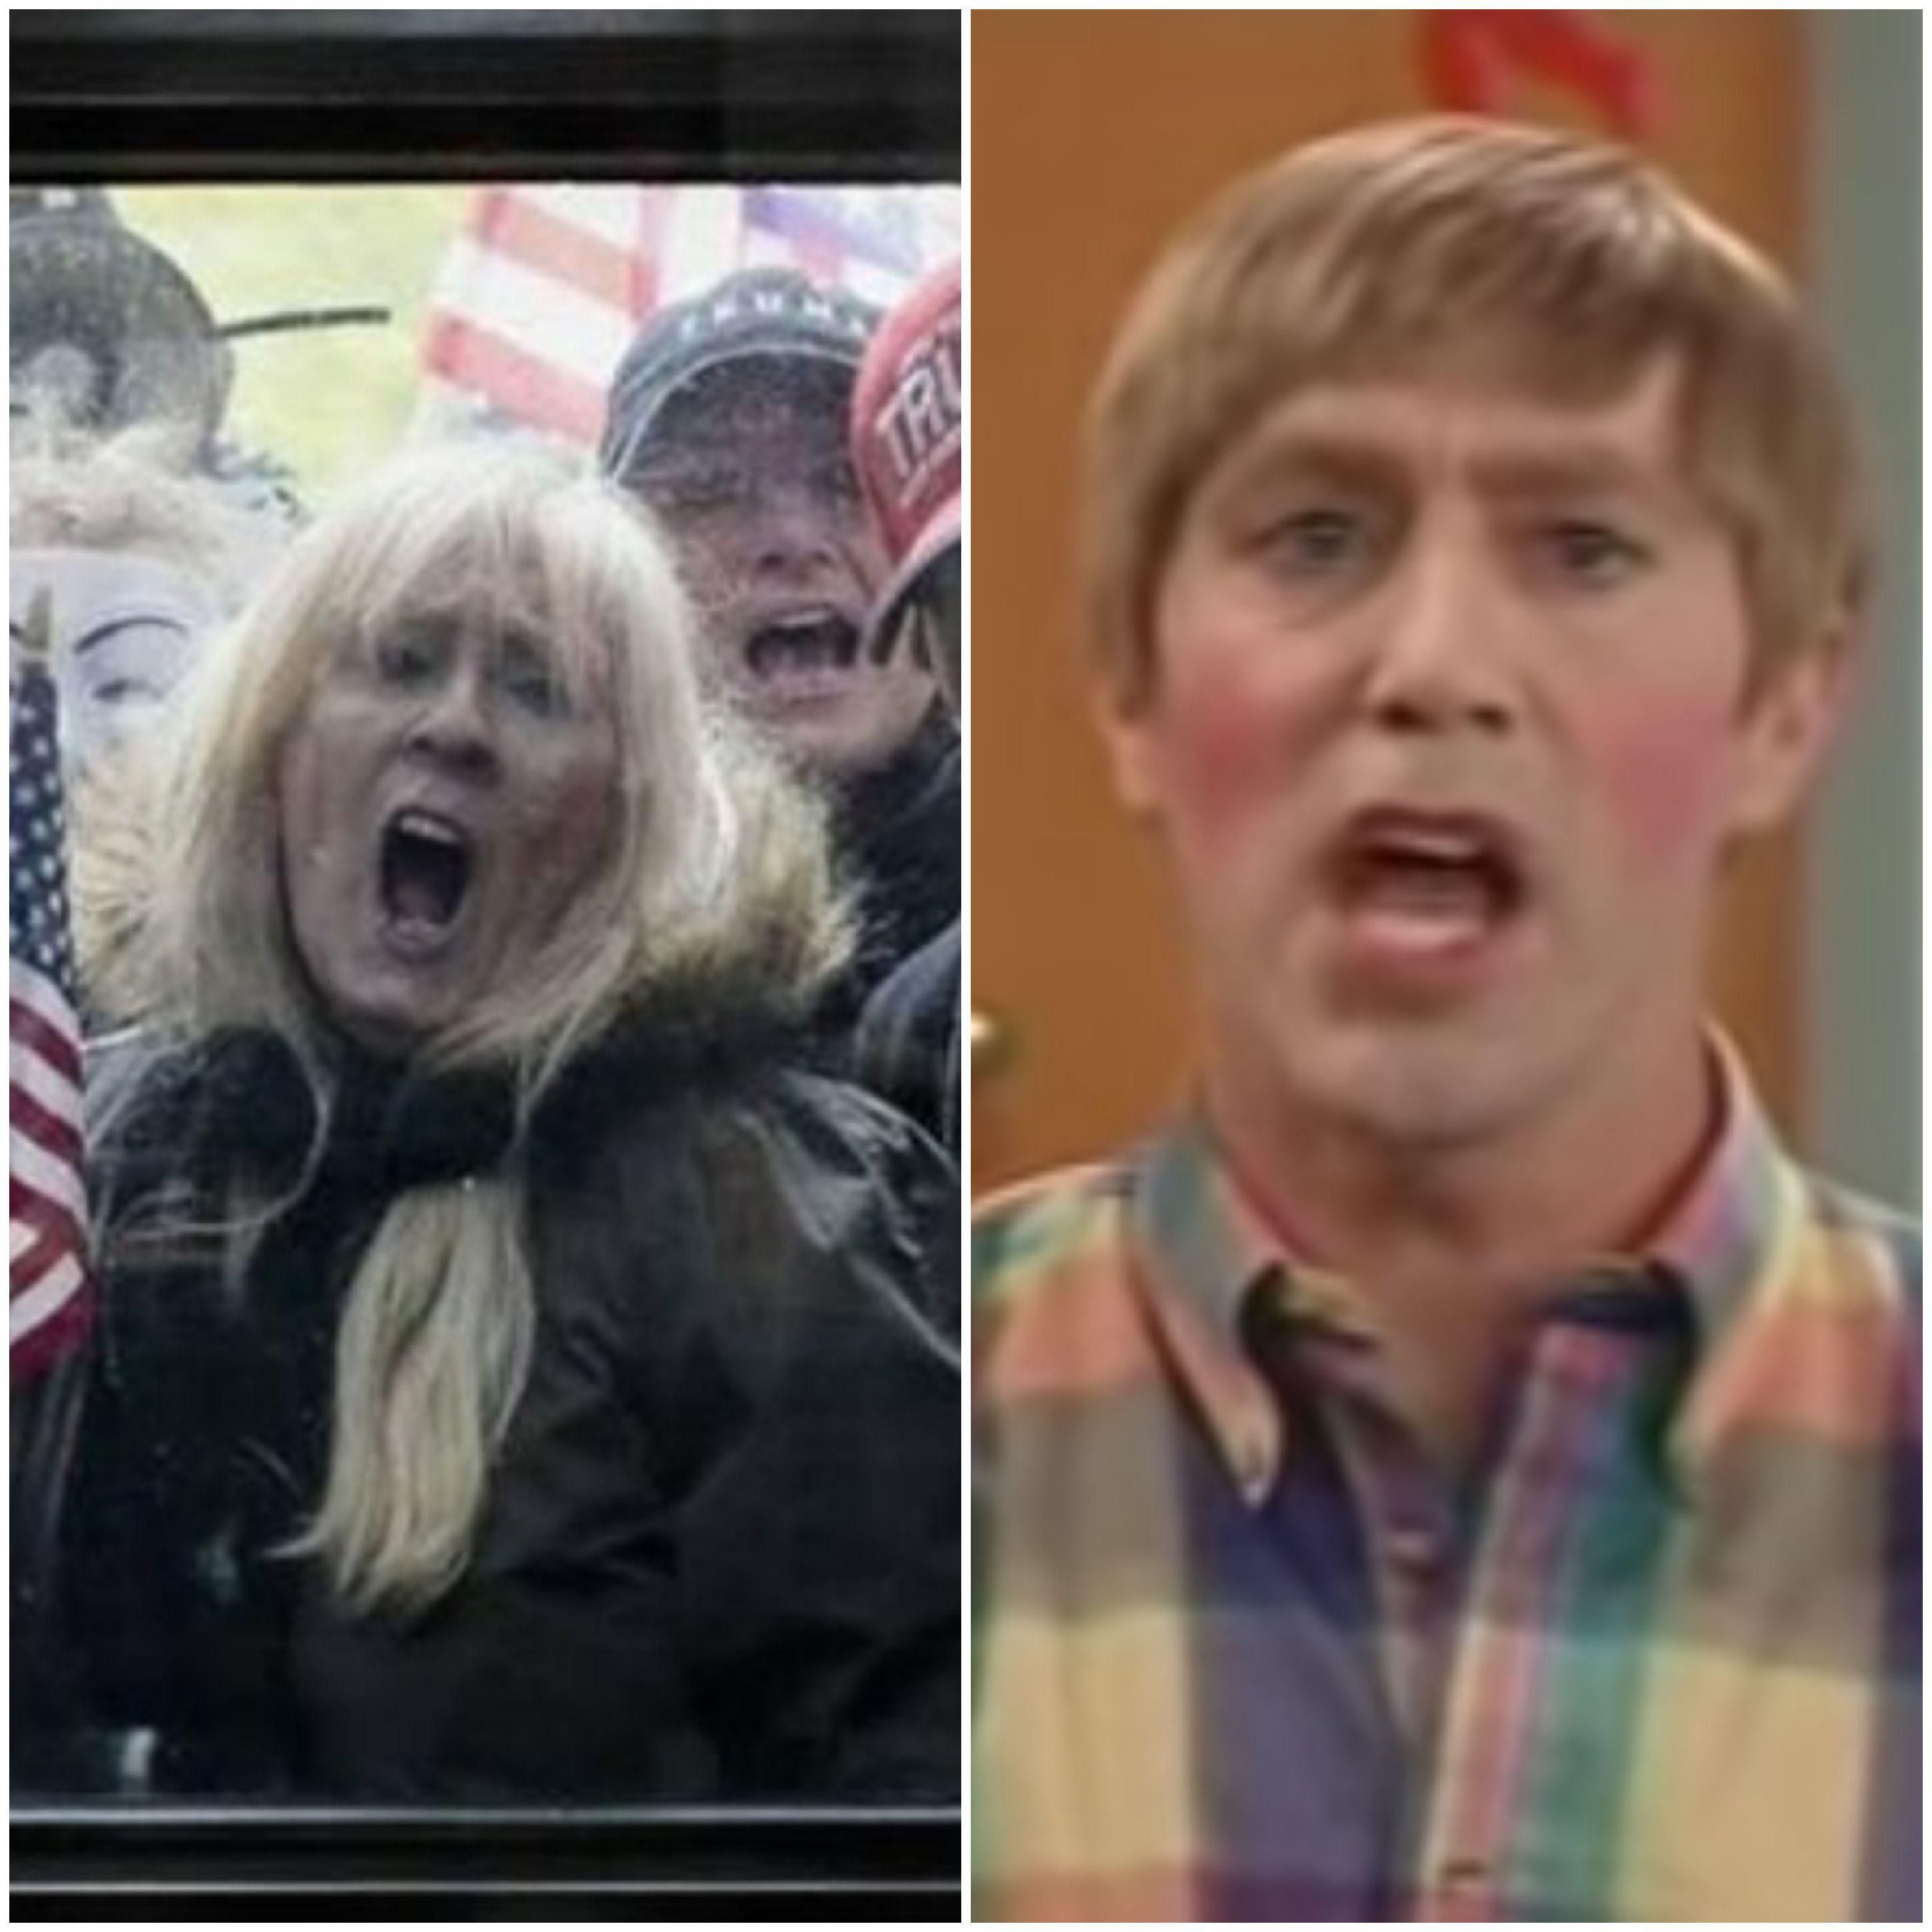 I Knew That Quarantine Protester Looked Familiar...